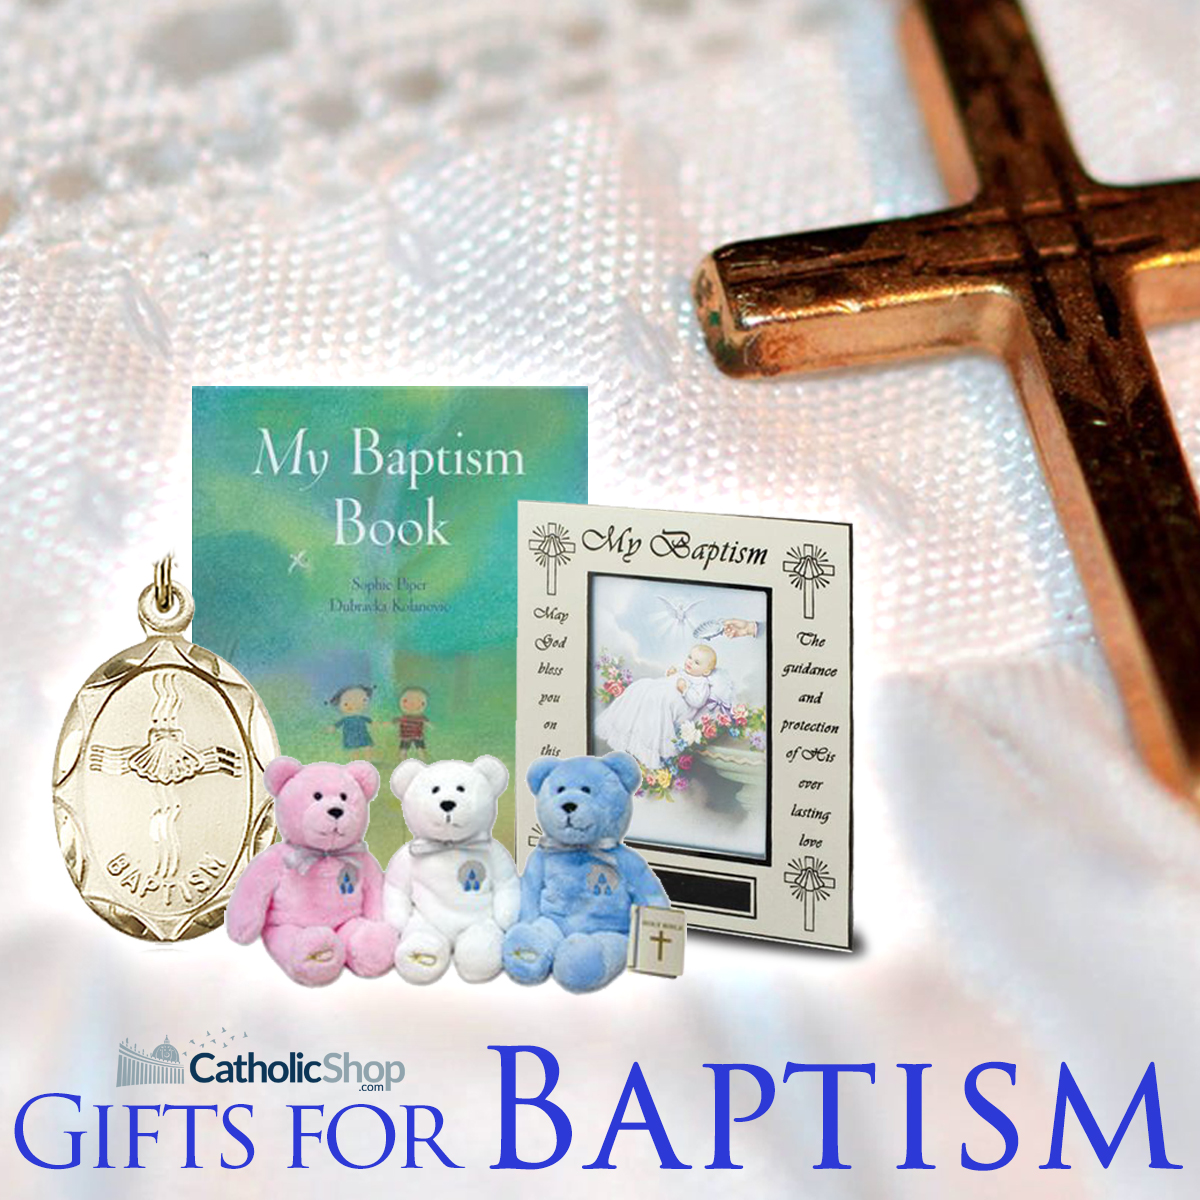 The Sacrament of Baptism: Why It Matters